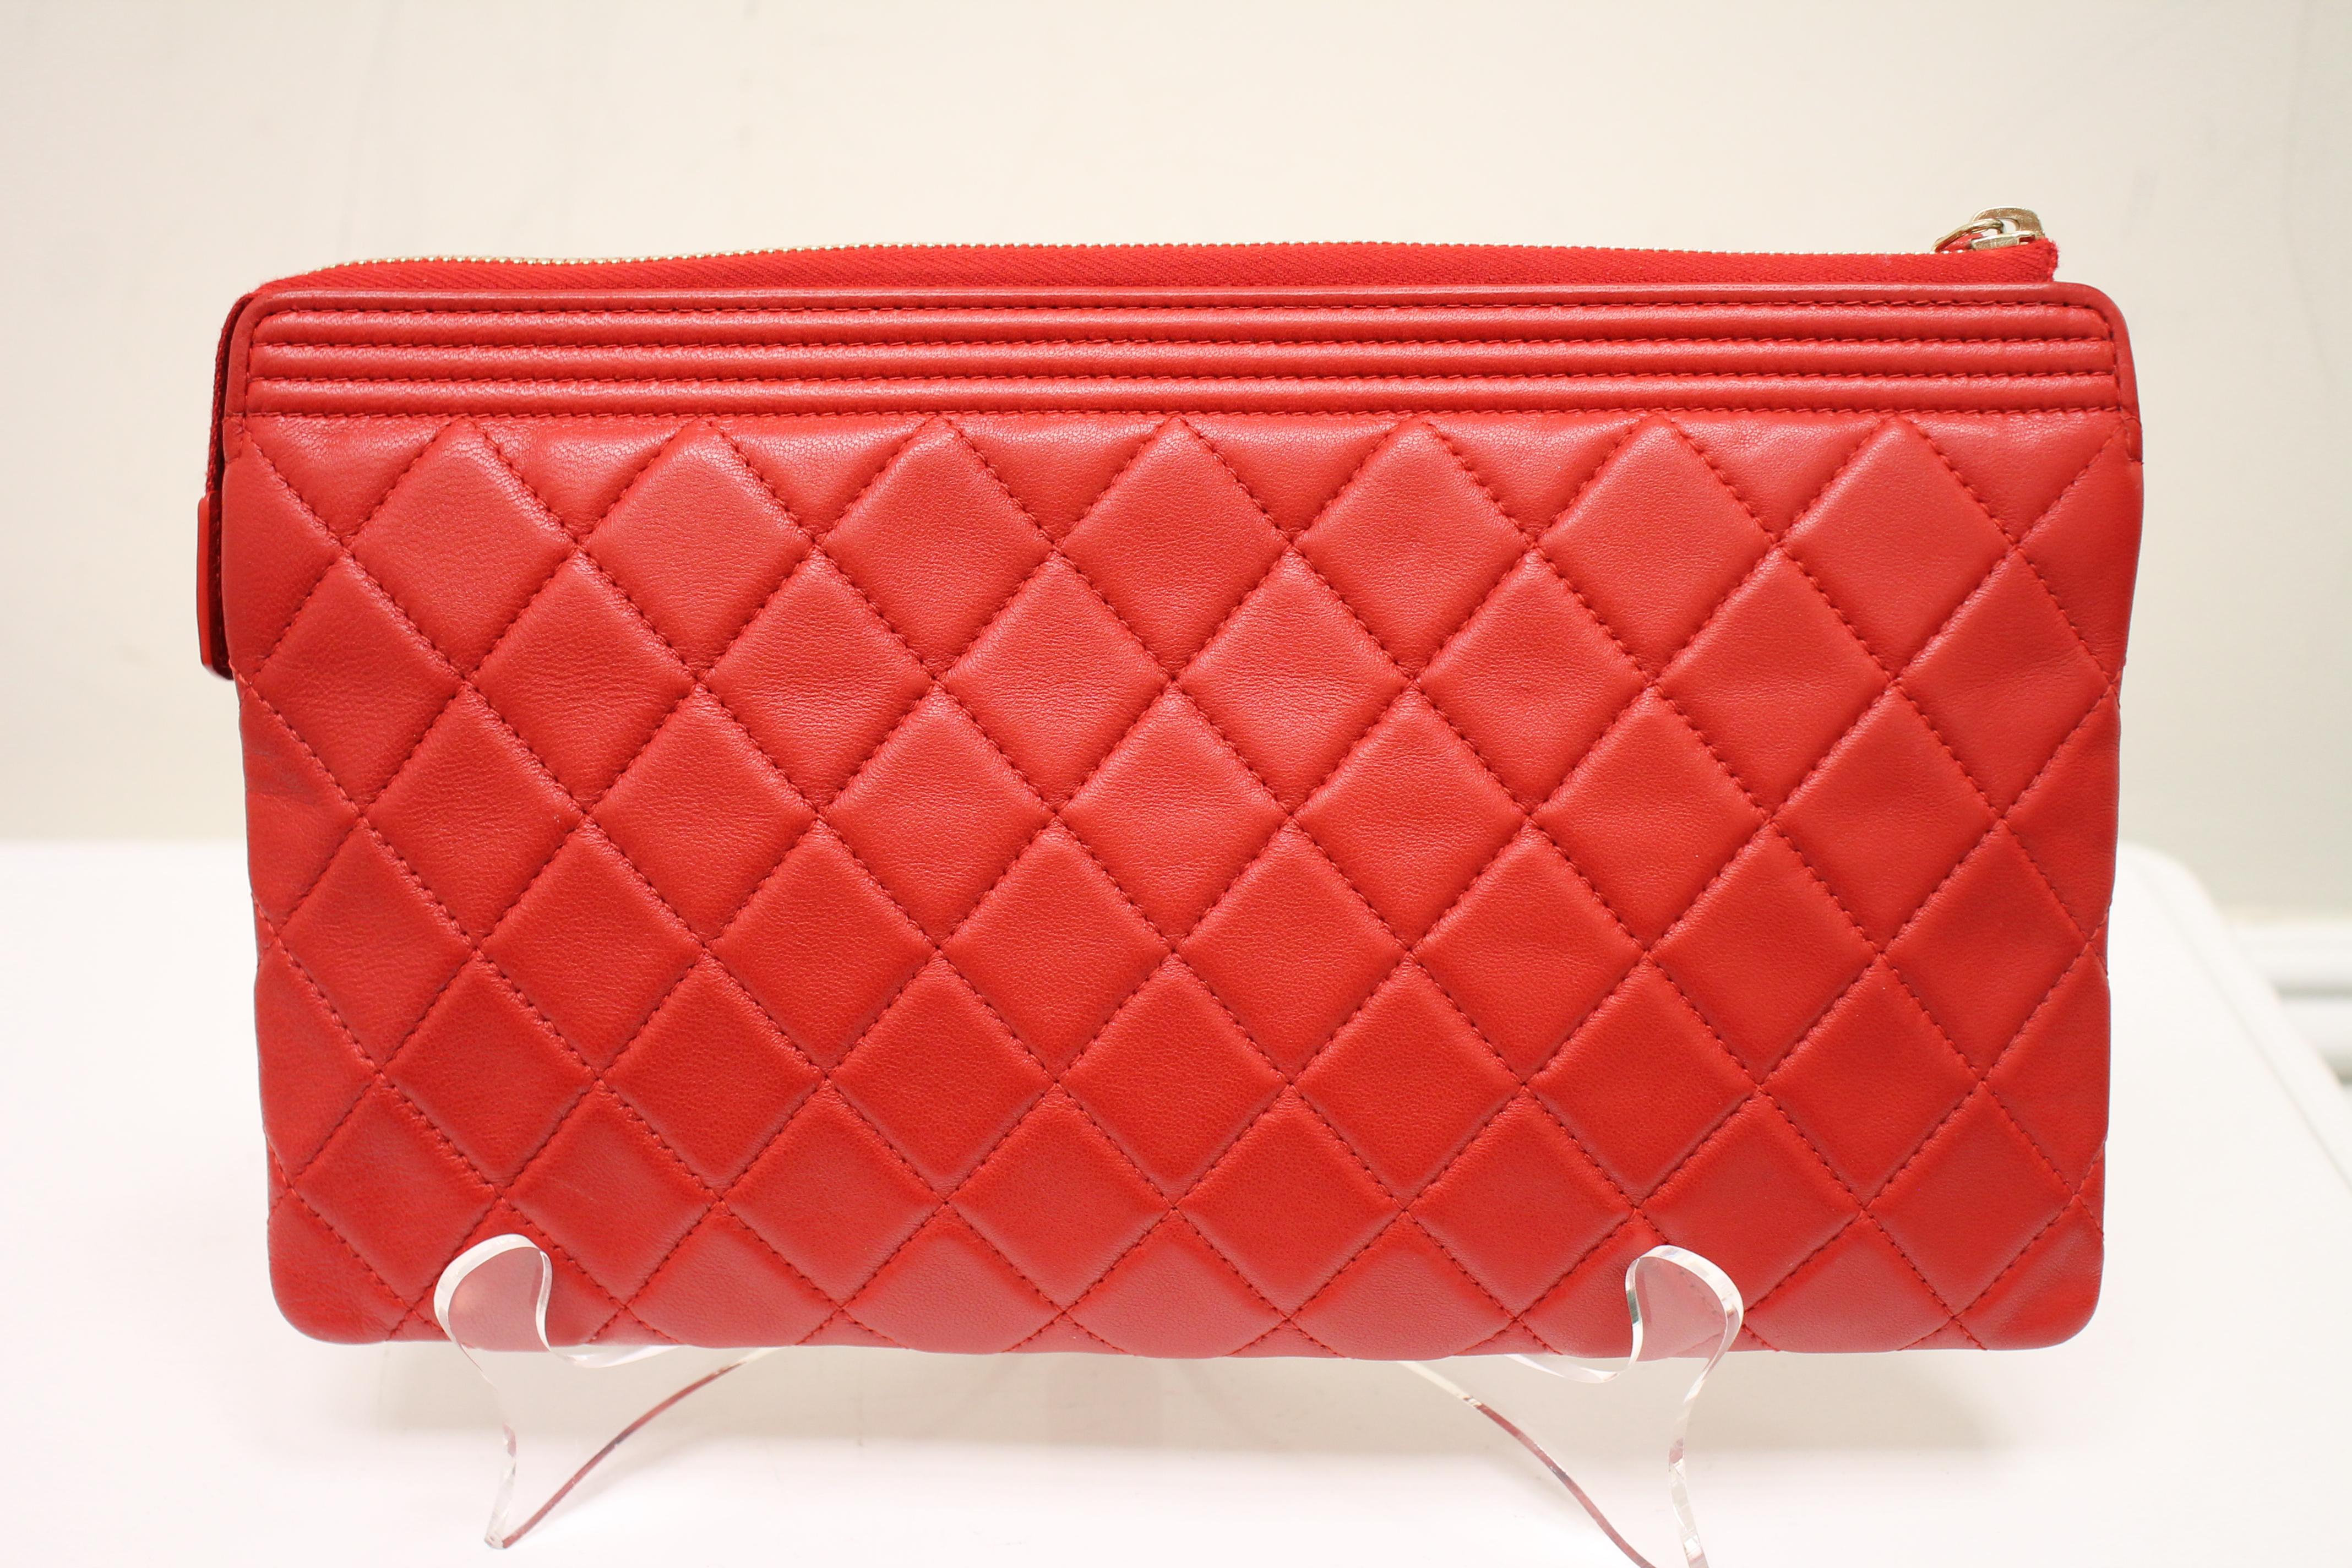 Chanel Boy Quilted Calfskin Clutch In Excellent Condition For Sale In Roslyn, NY